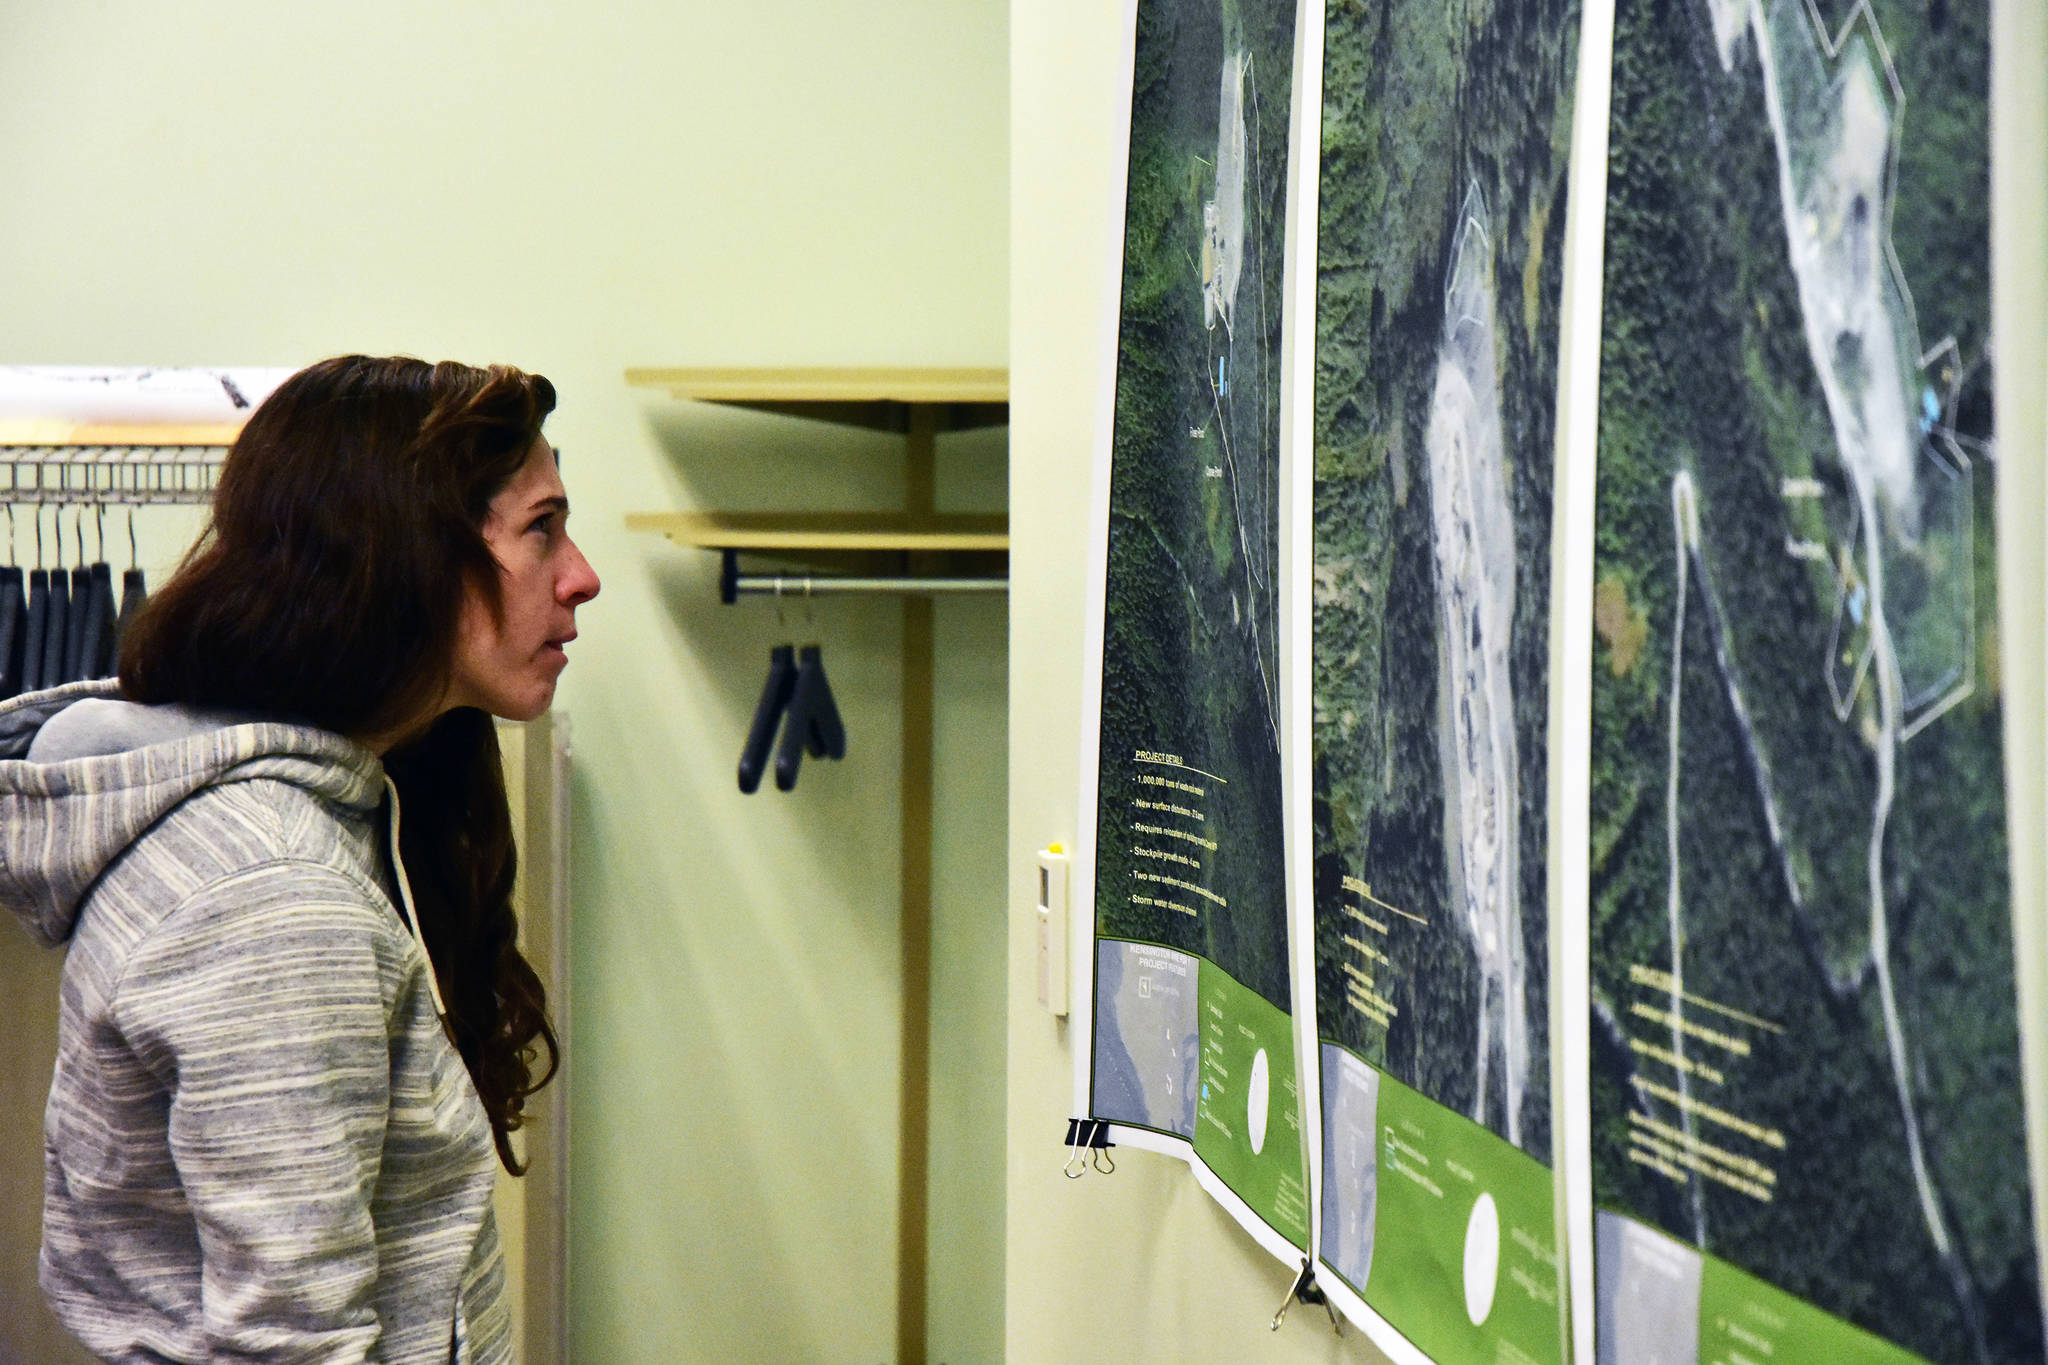 A member of the public examines maps of the proposed expansion to Coeur Alaska’s Kensington Mine facilities at the Juneau Ranger District Station on Oct. 8, 2019 (Peter Segall | Juneau Empire)